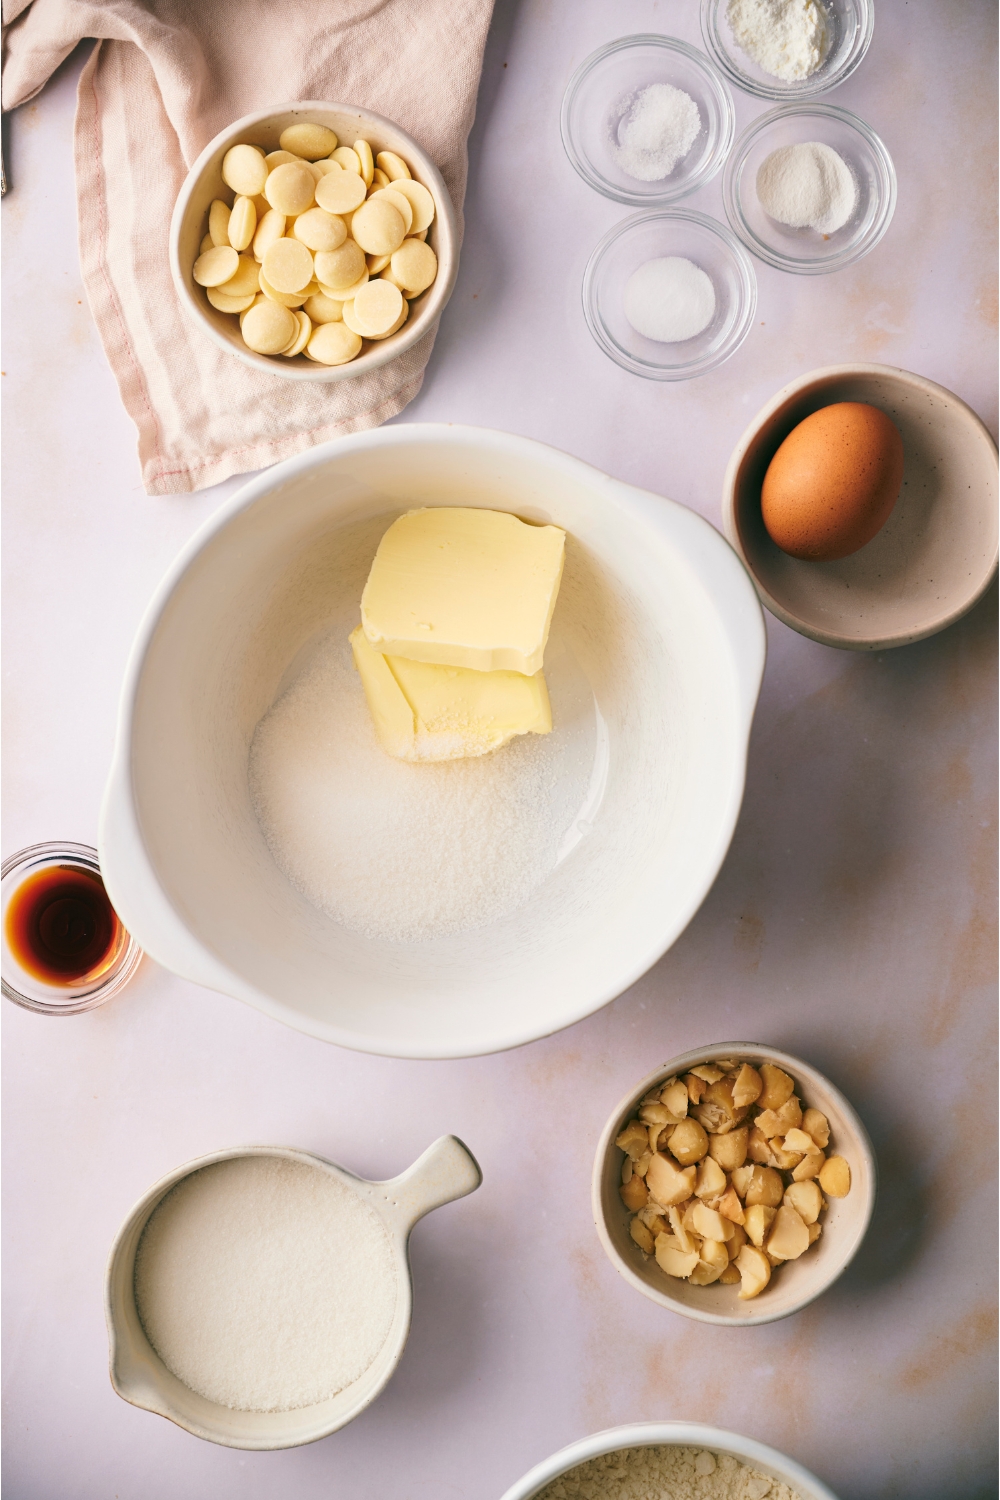 A white mixing bowl with butter and sugar in the bowl, not yet mixed together. The bowl is surrounded by ingredients including white chocolate chips, macadamia nuts, and vanilla extract.